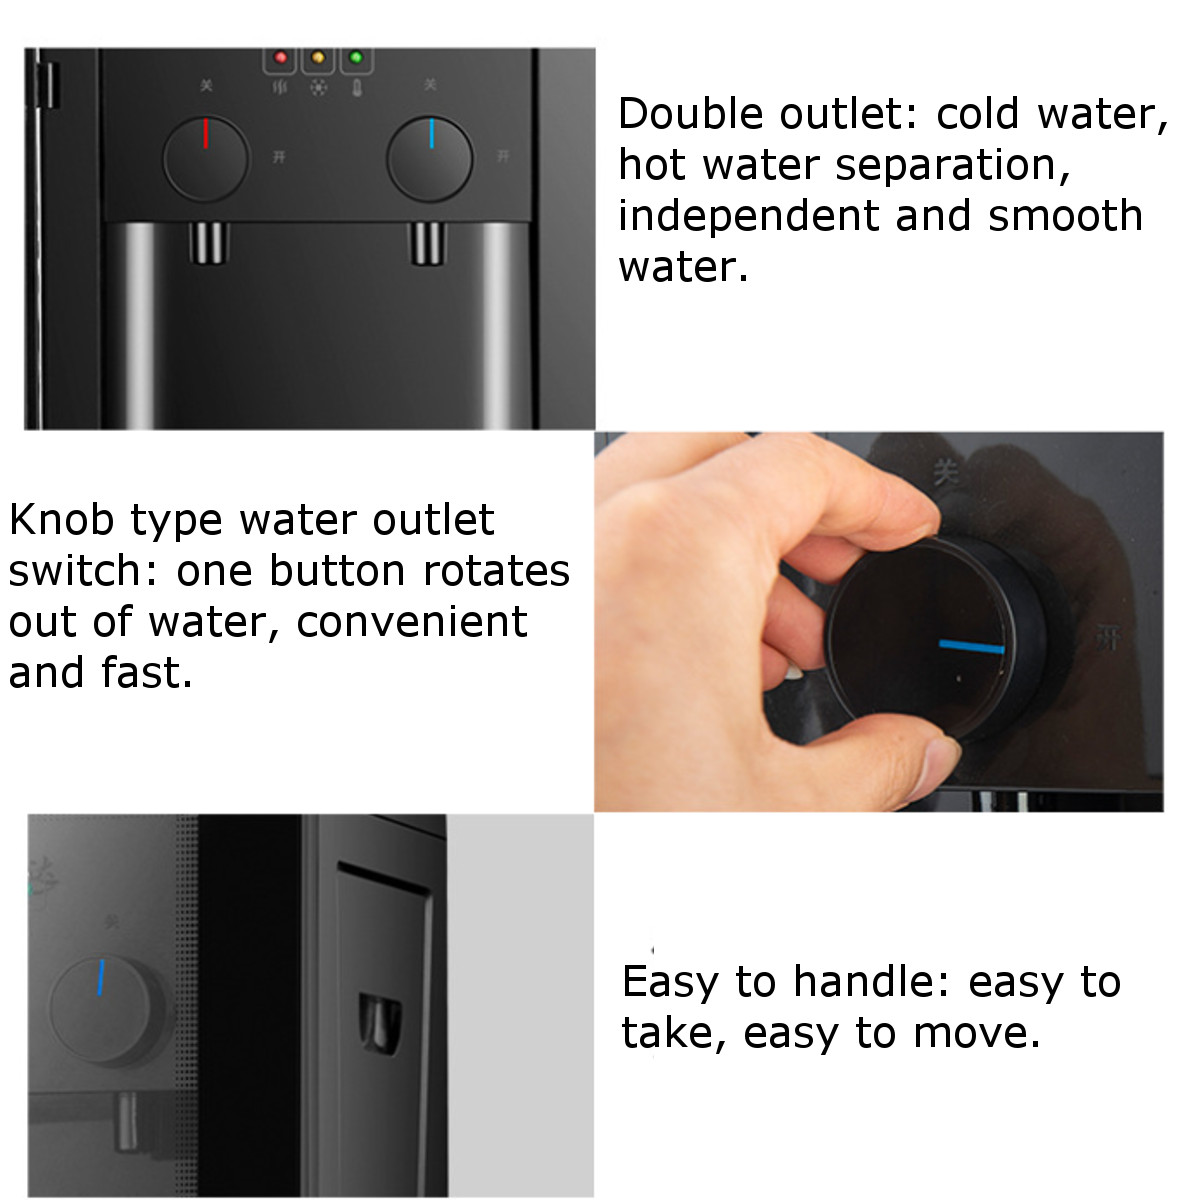 Electric-Water-ColdHot-Dispenser-Heater-Drinking-Fountain-Home-Office-Coffee-1610442